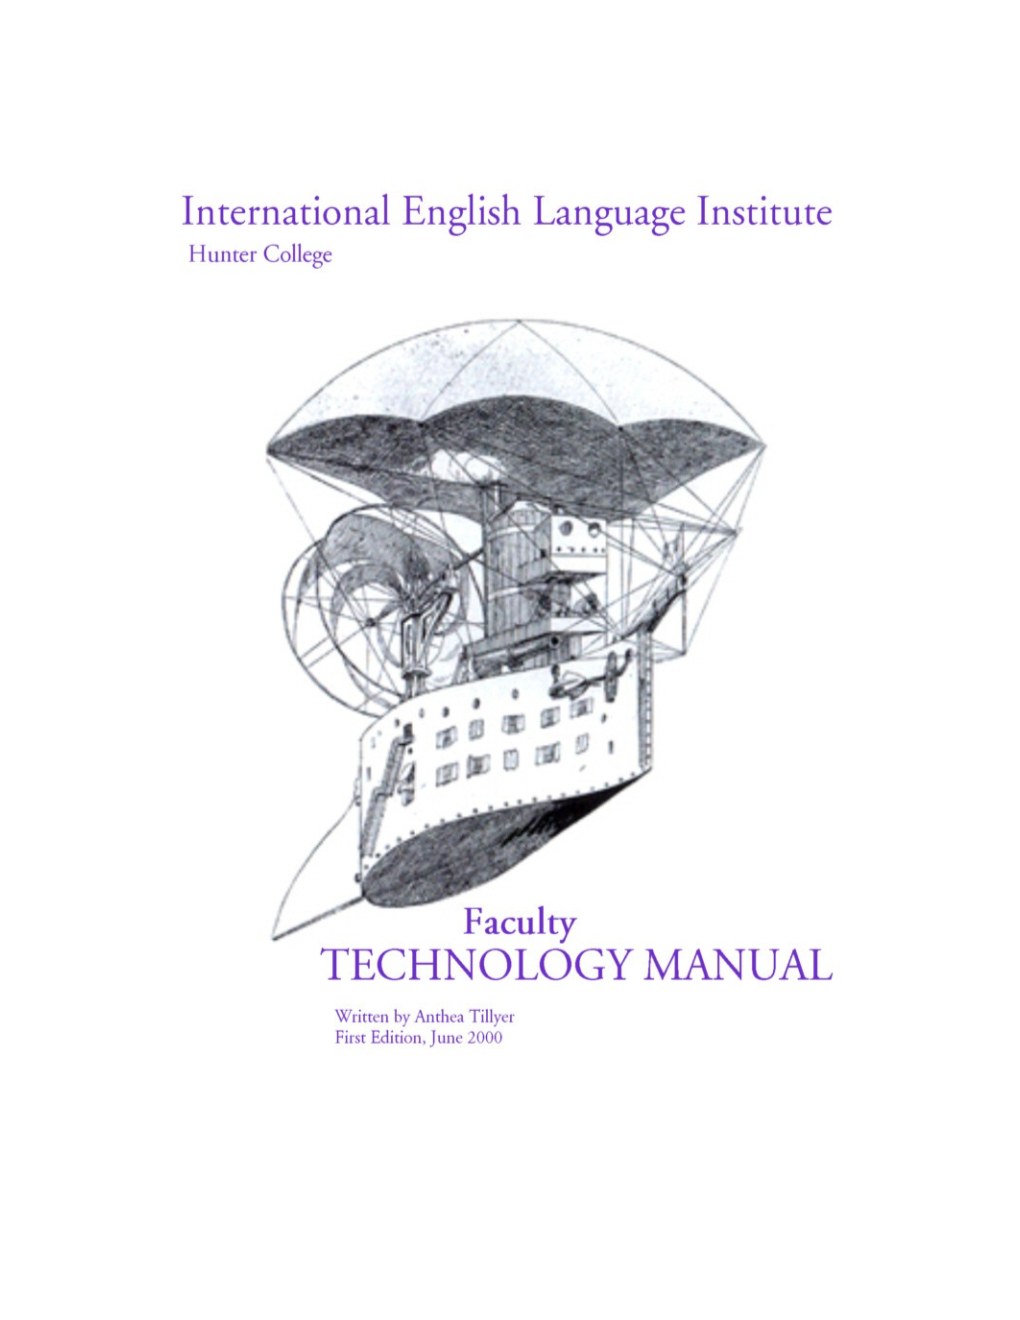 Technology Manual for Faculty